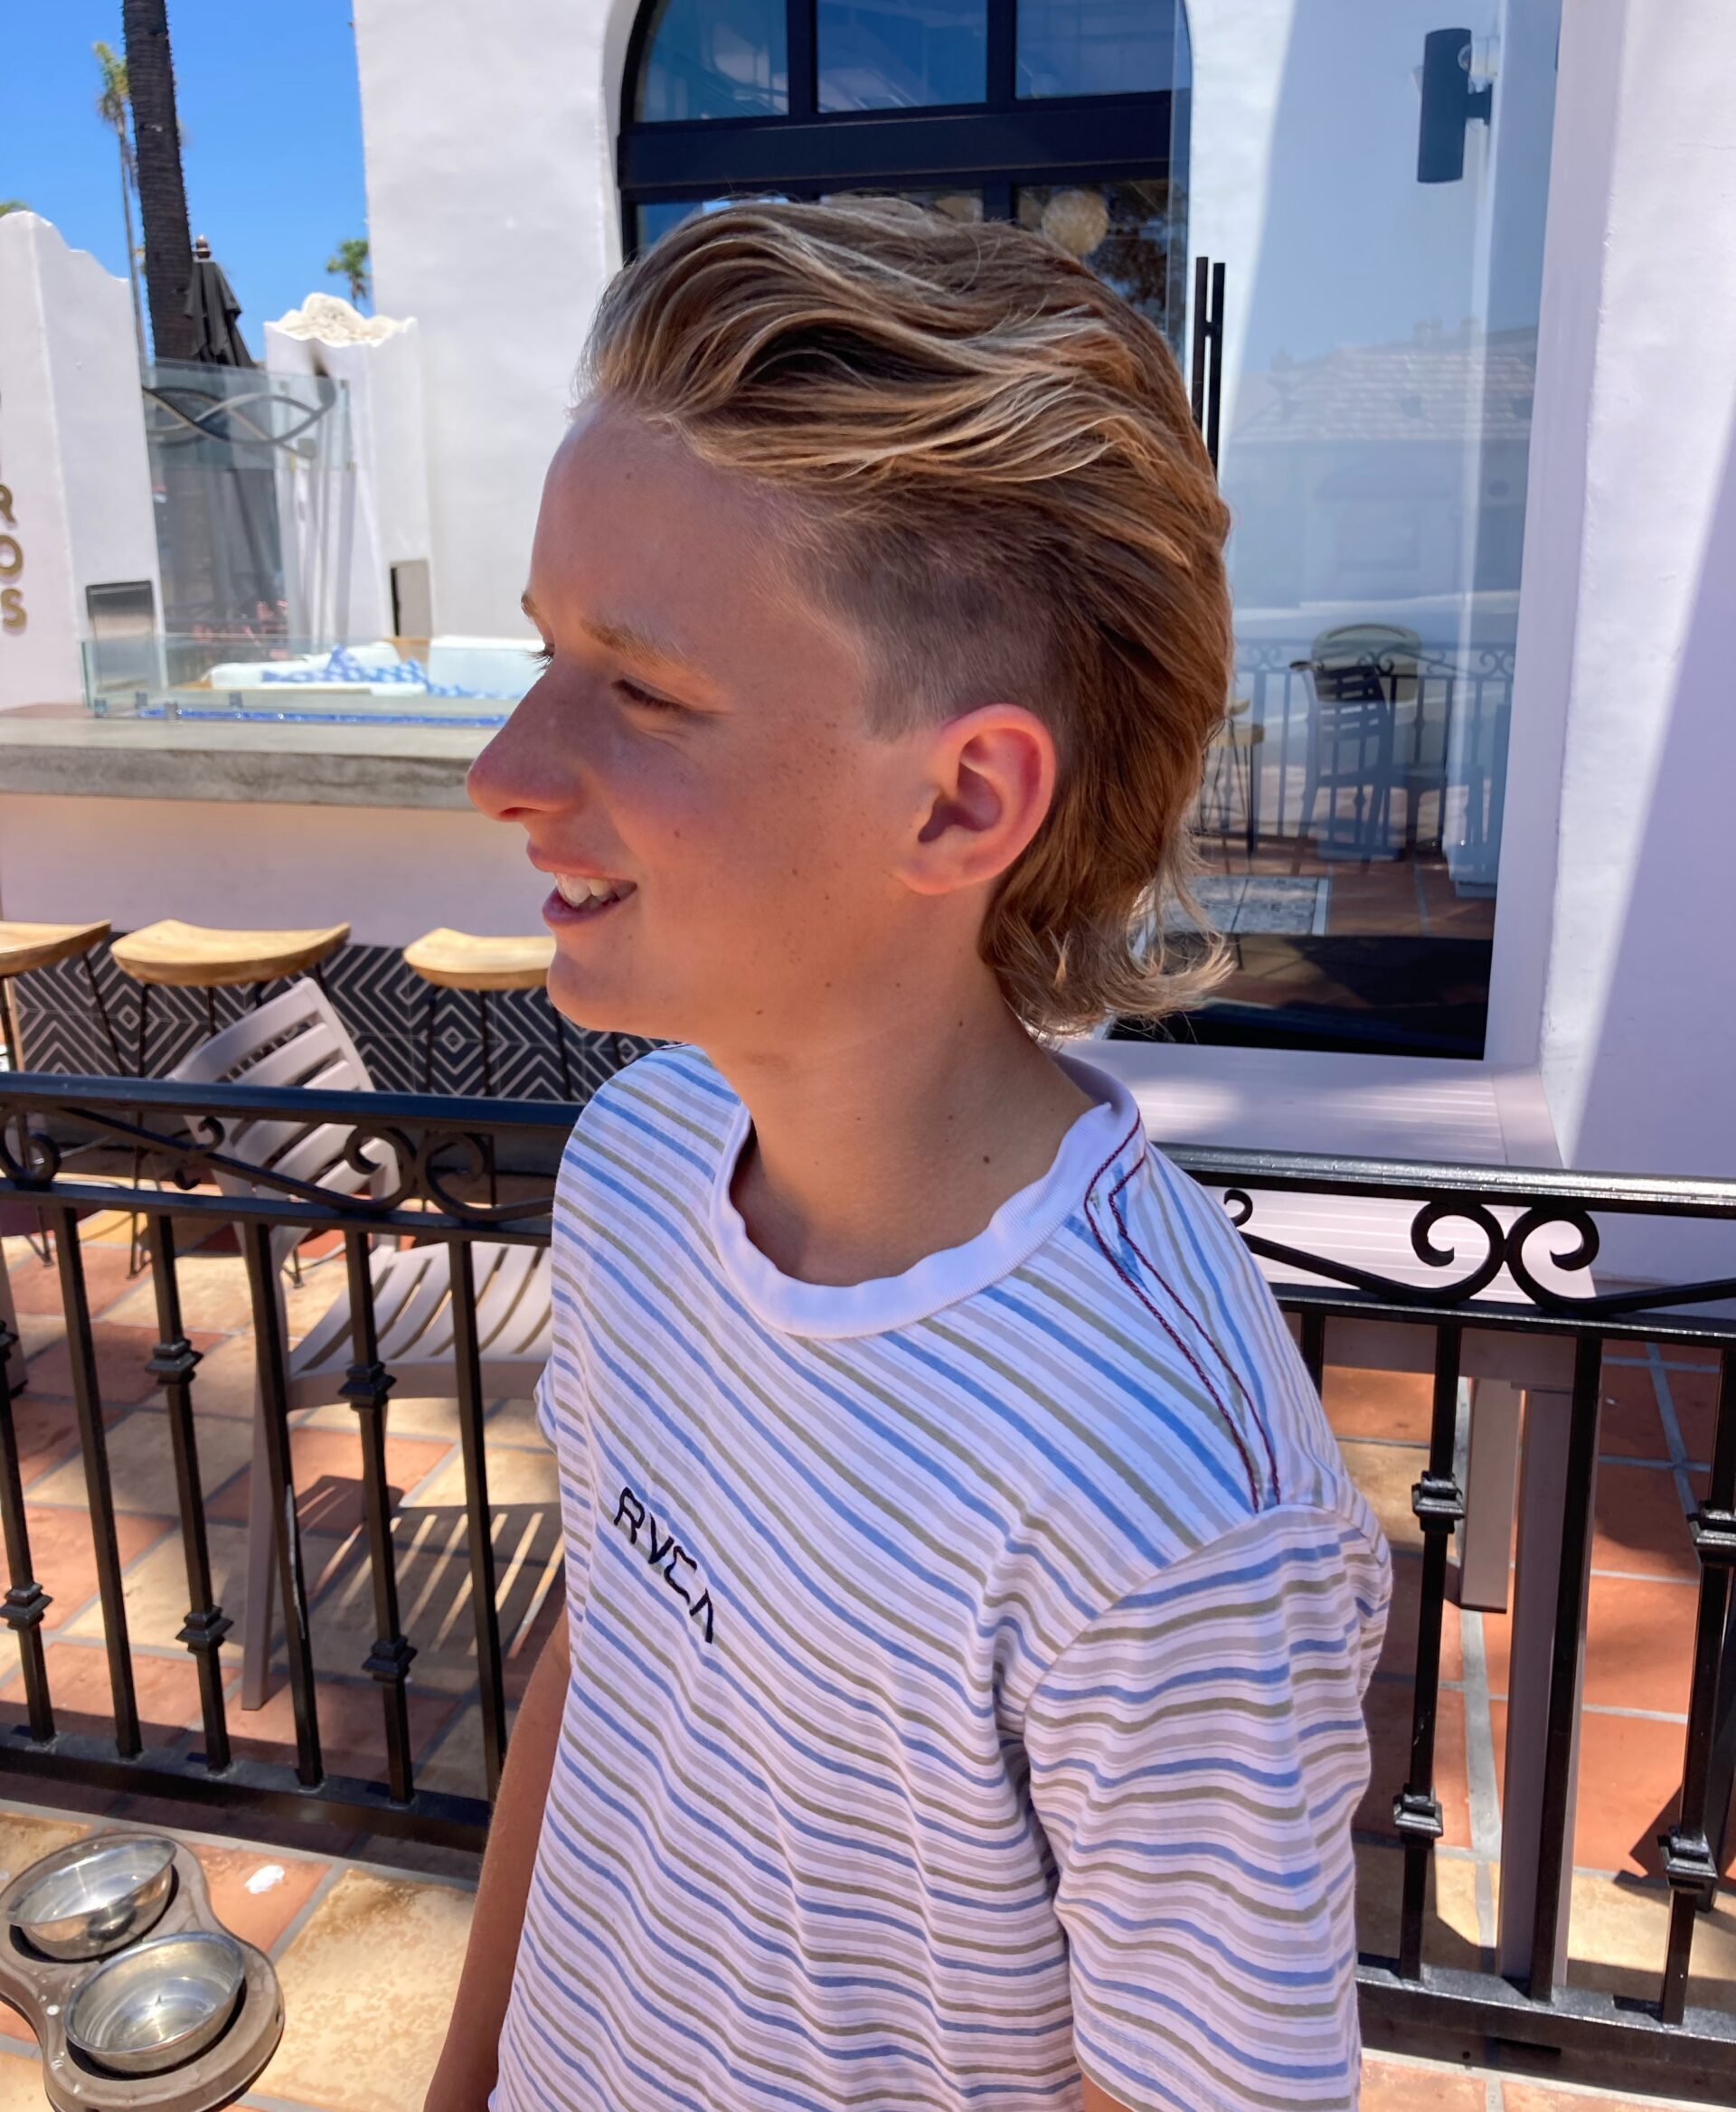 Charlie's Mullets 4 Orphans fundraiser results